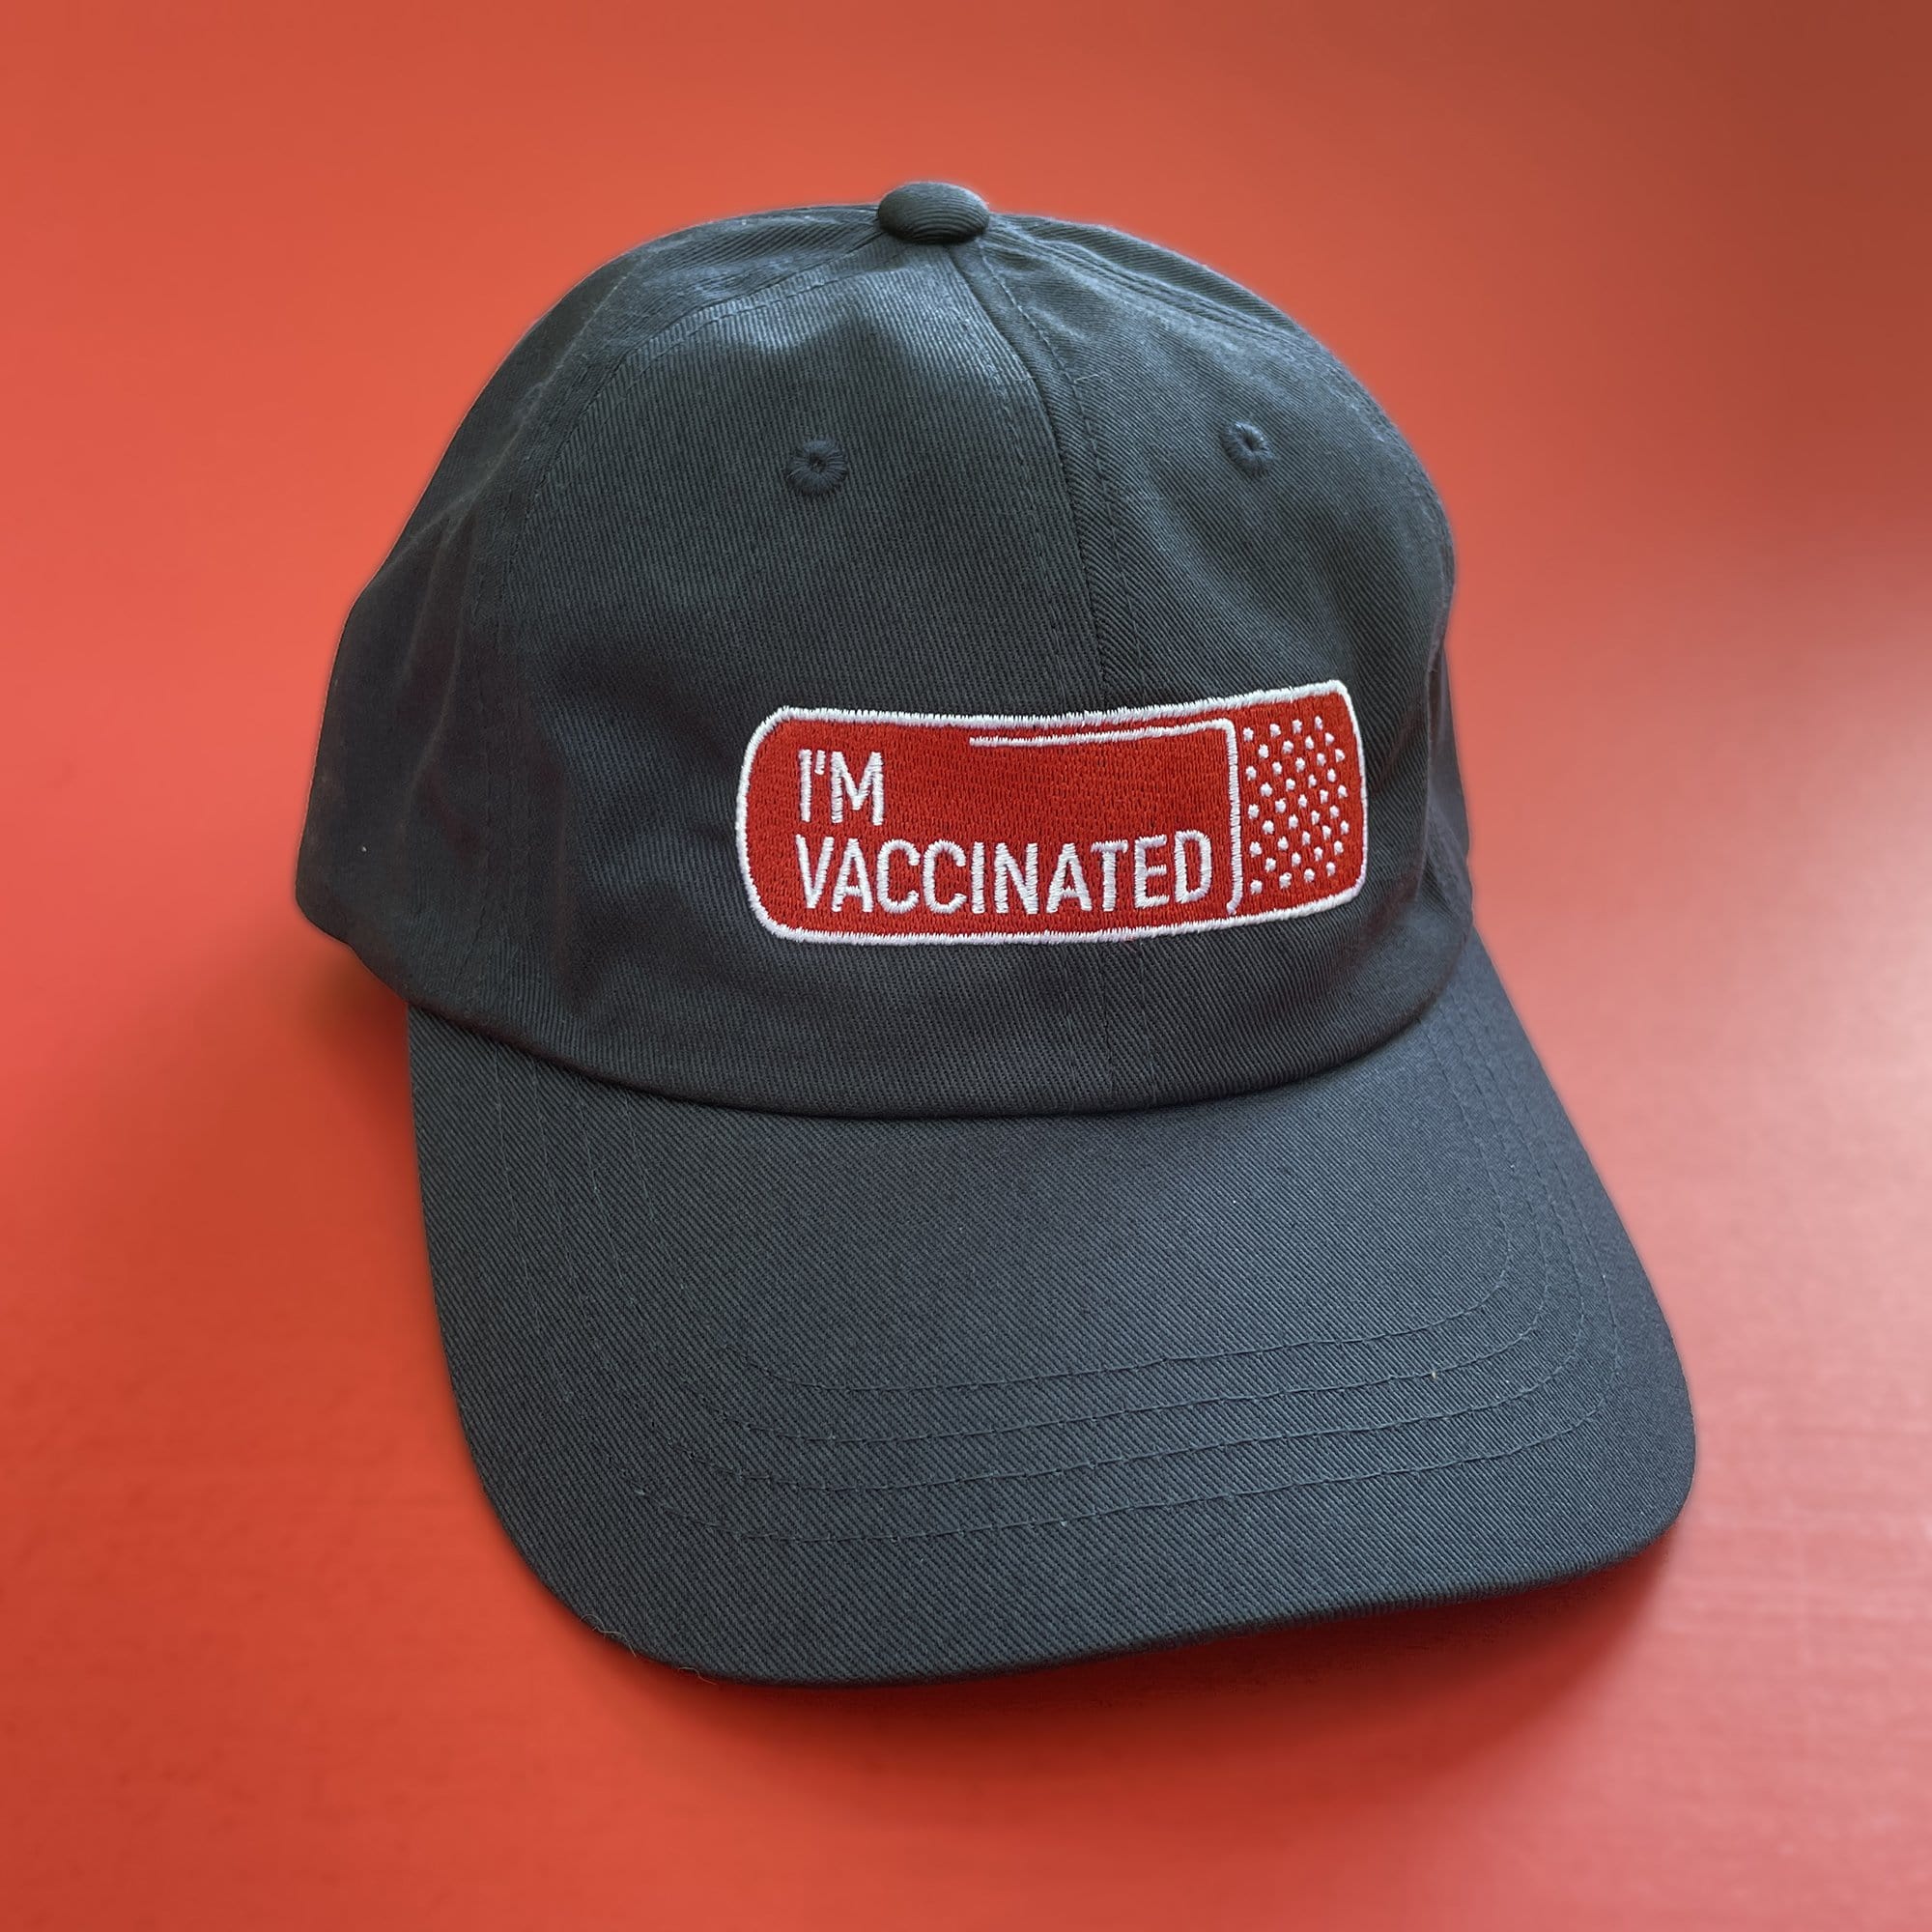 I'm Vaccinated Baseball Cap - Limited Edition